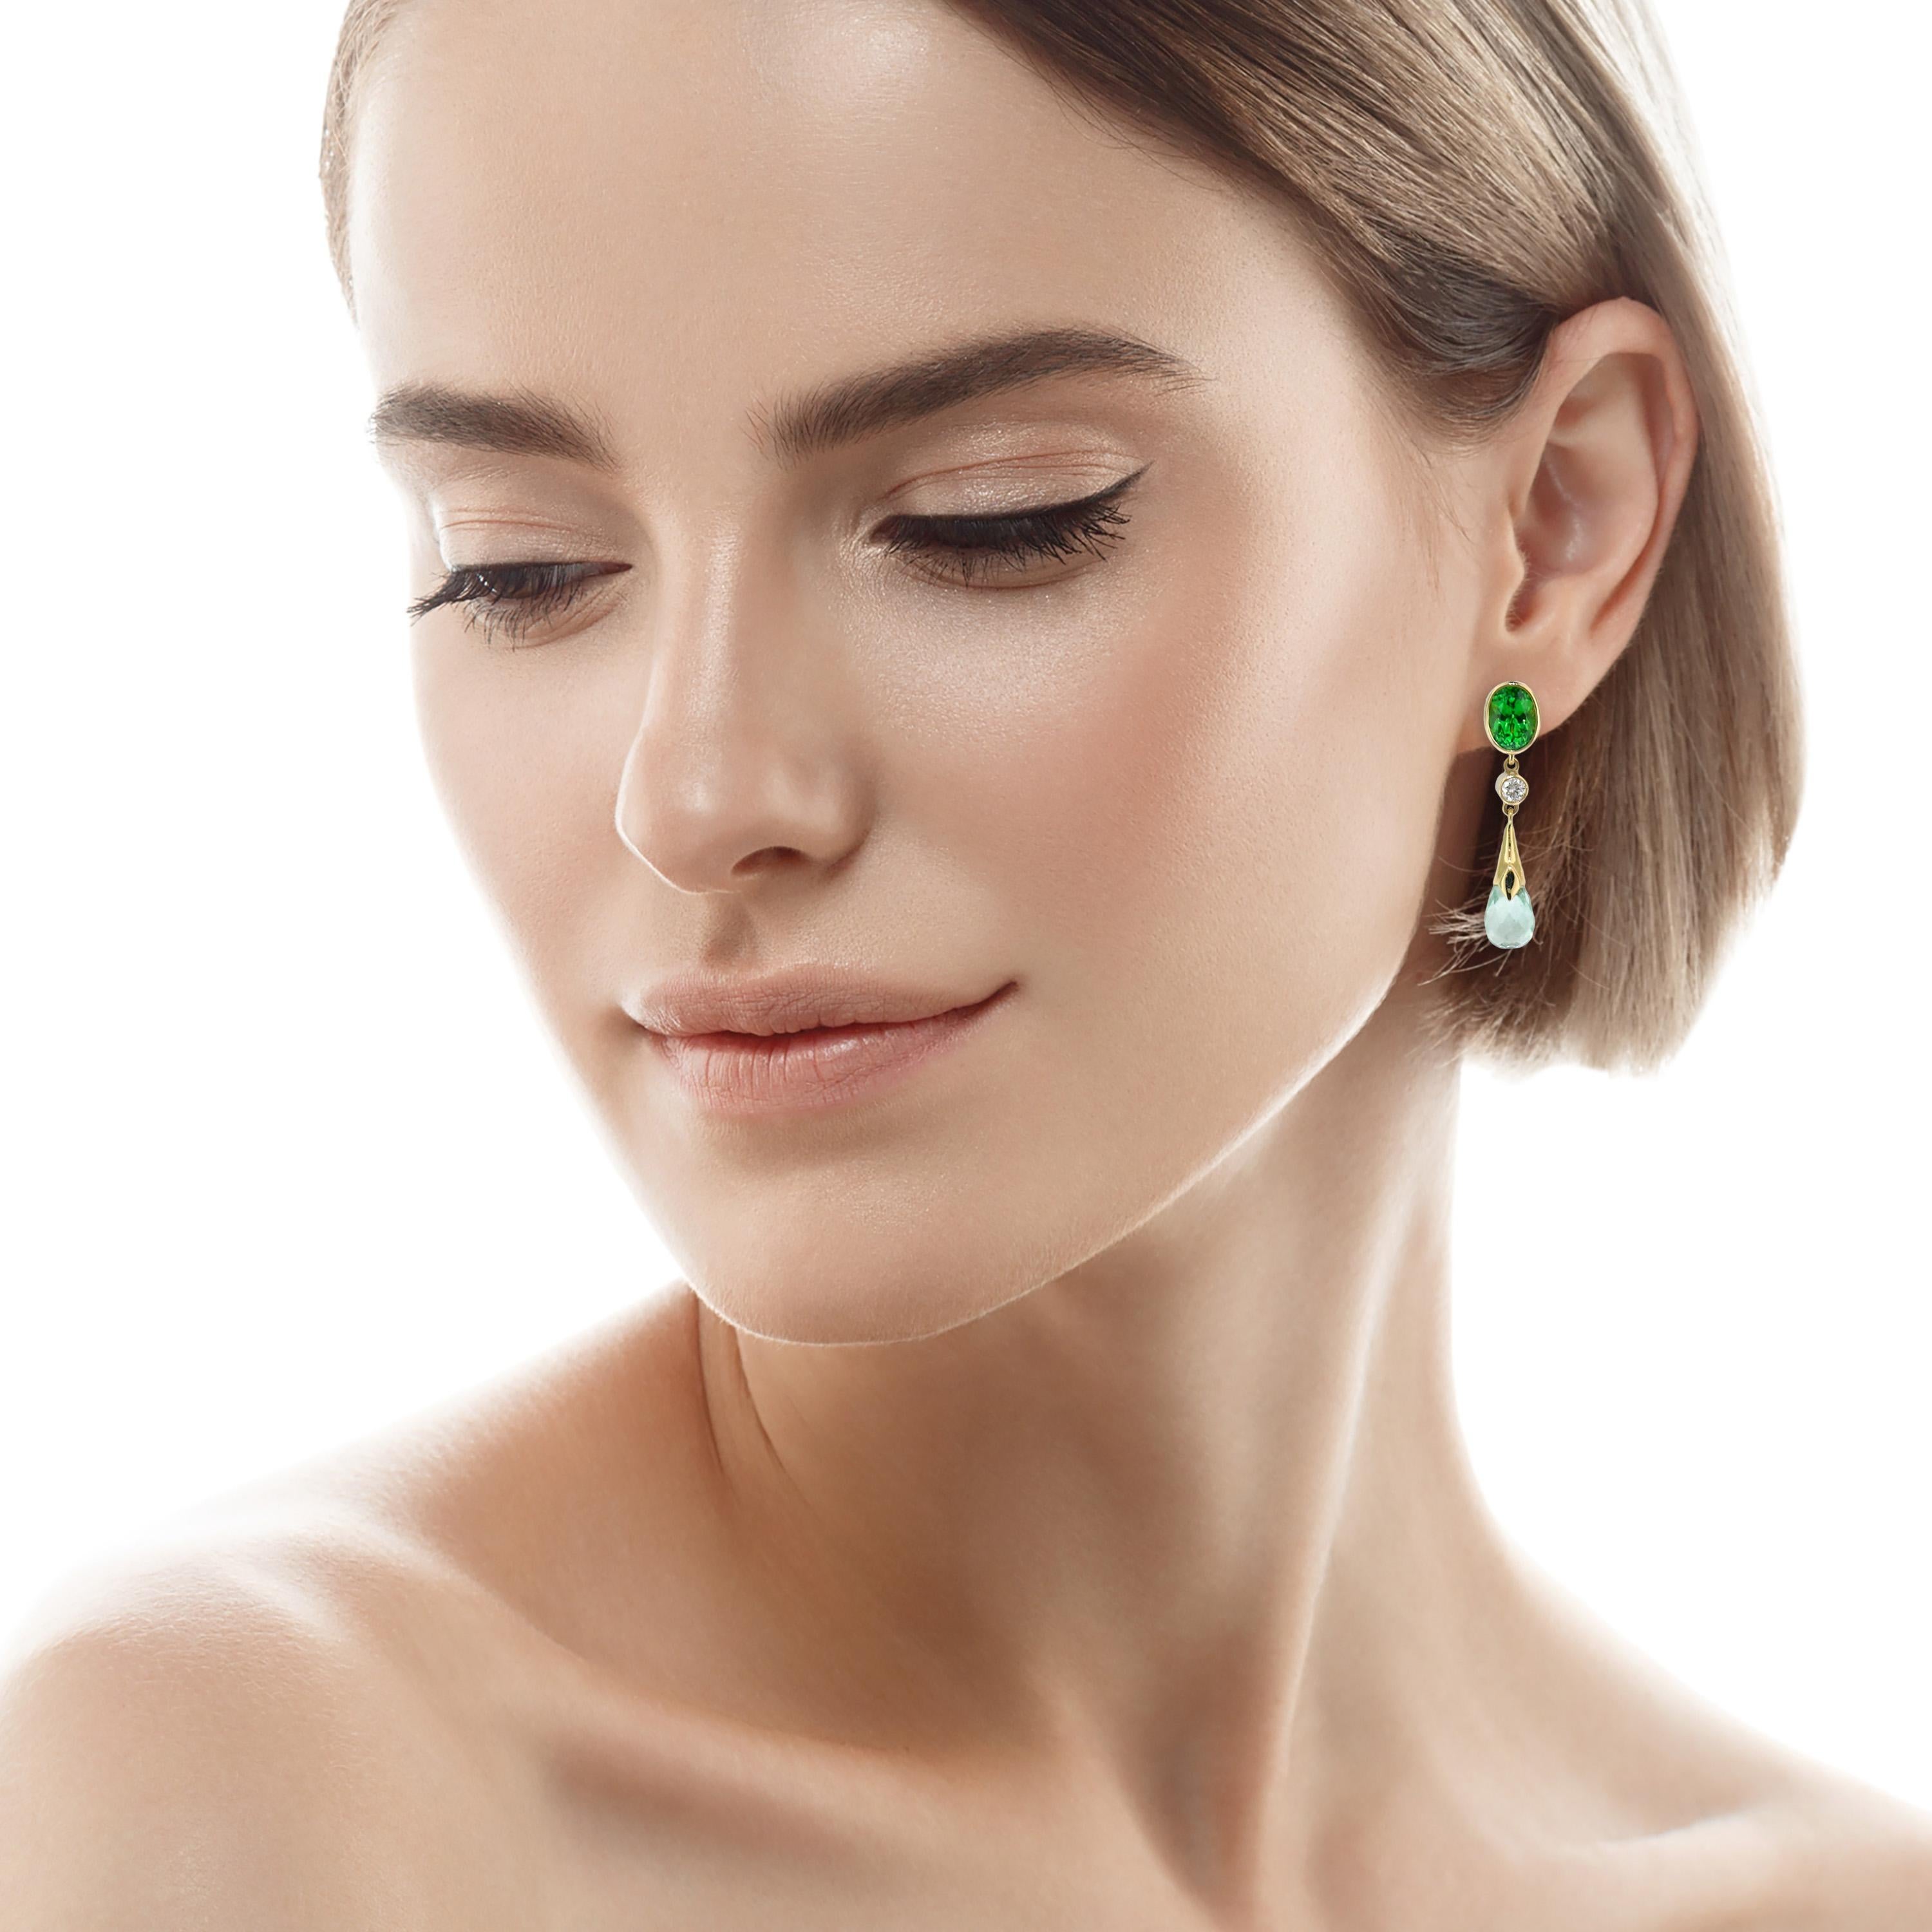 Bold and brilliant tsavorite garnets are paired perfectly with delicately hued mint green tourmaline drops in these verdant and elegant earrings.

Featuring effortless movement, sculptural 18kt accents, and brilliant diamonds, these earrings are